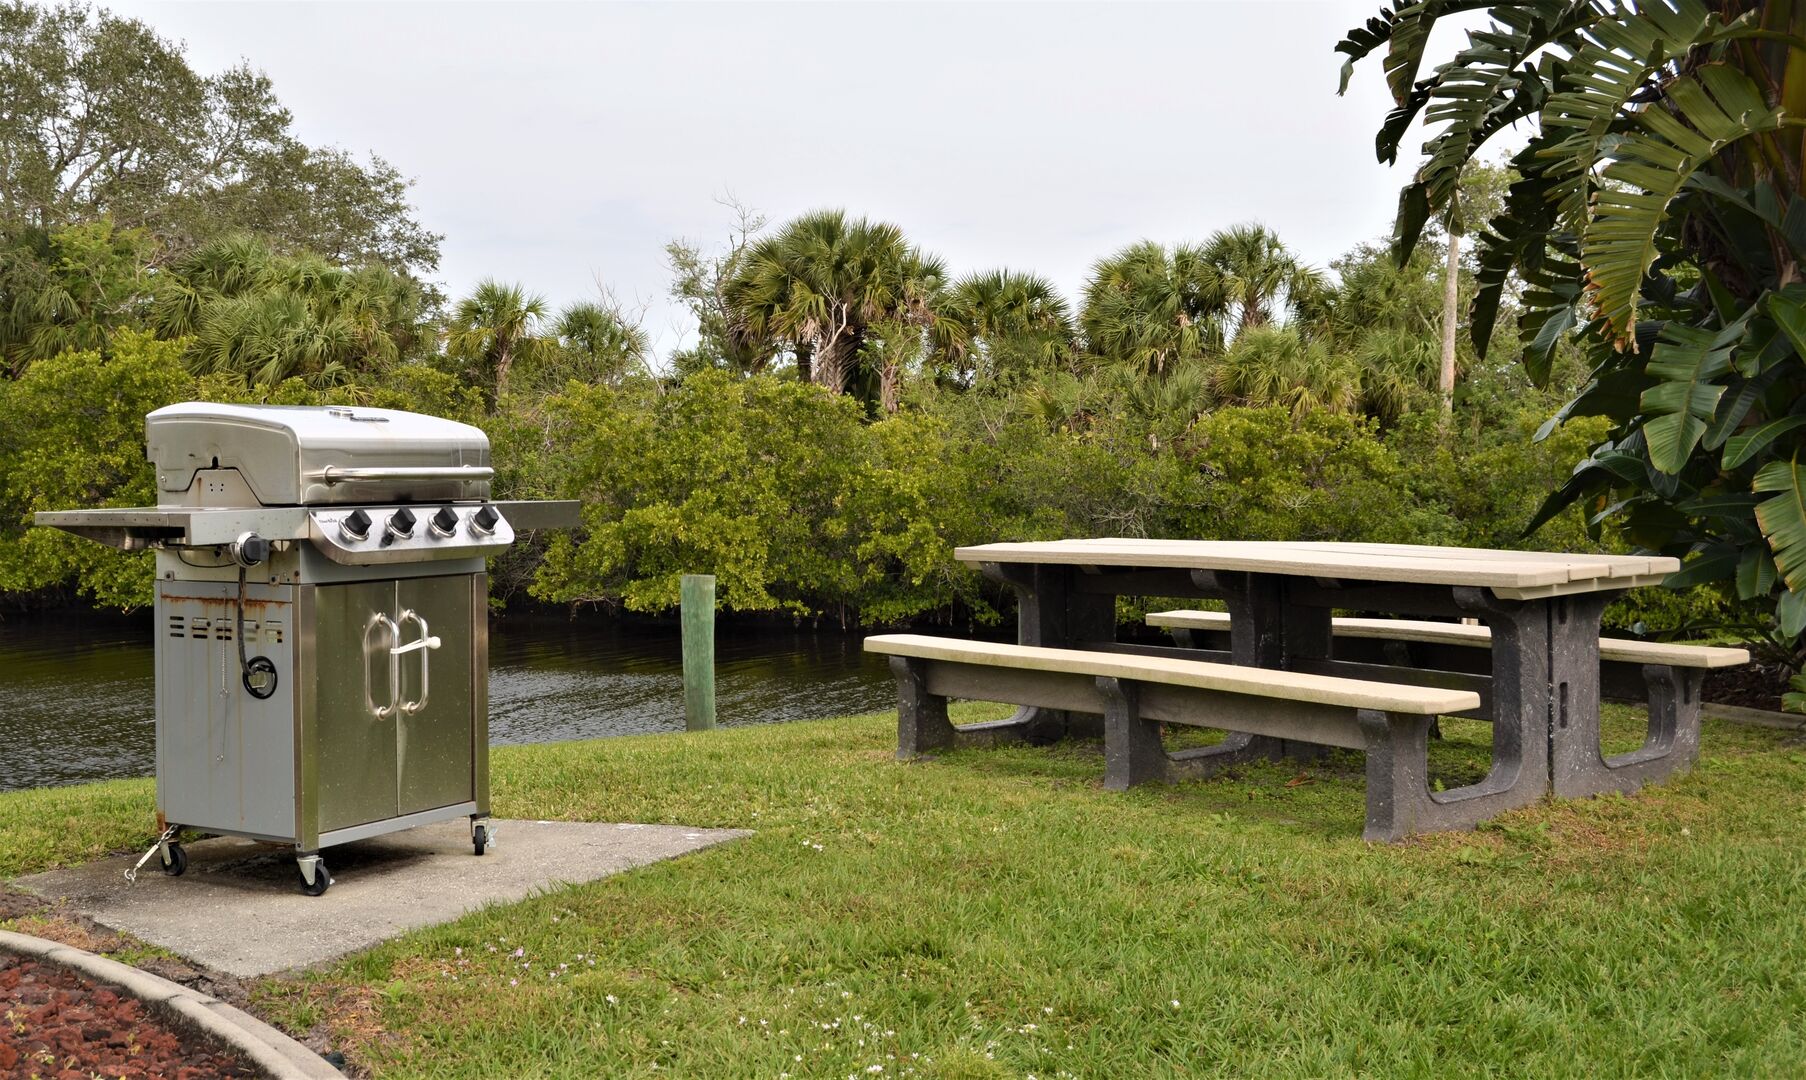 Multiple picnic areas along the resort canal for guest use.